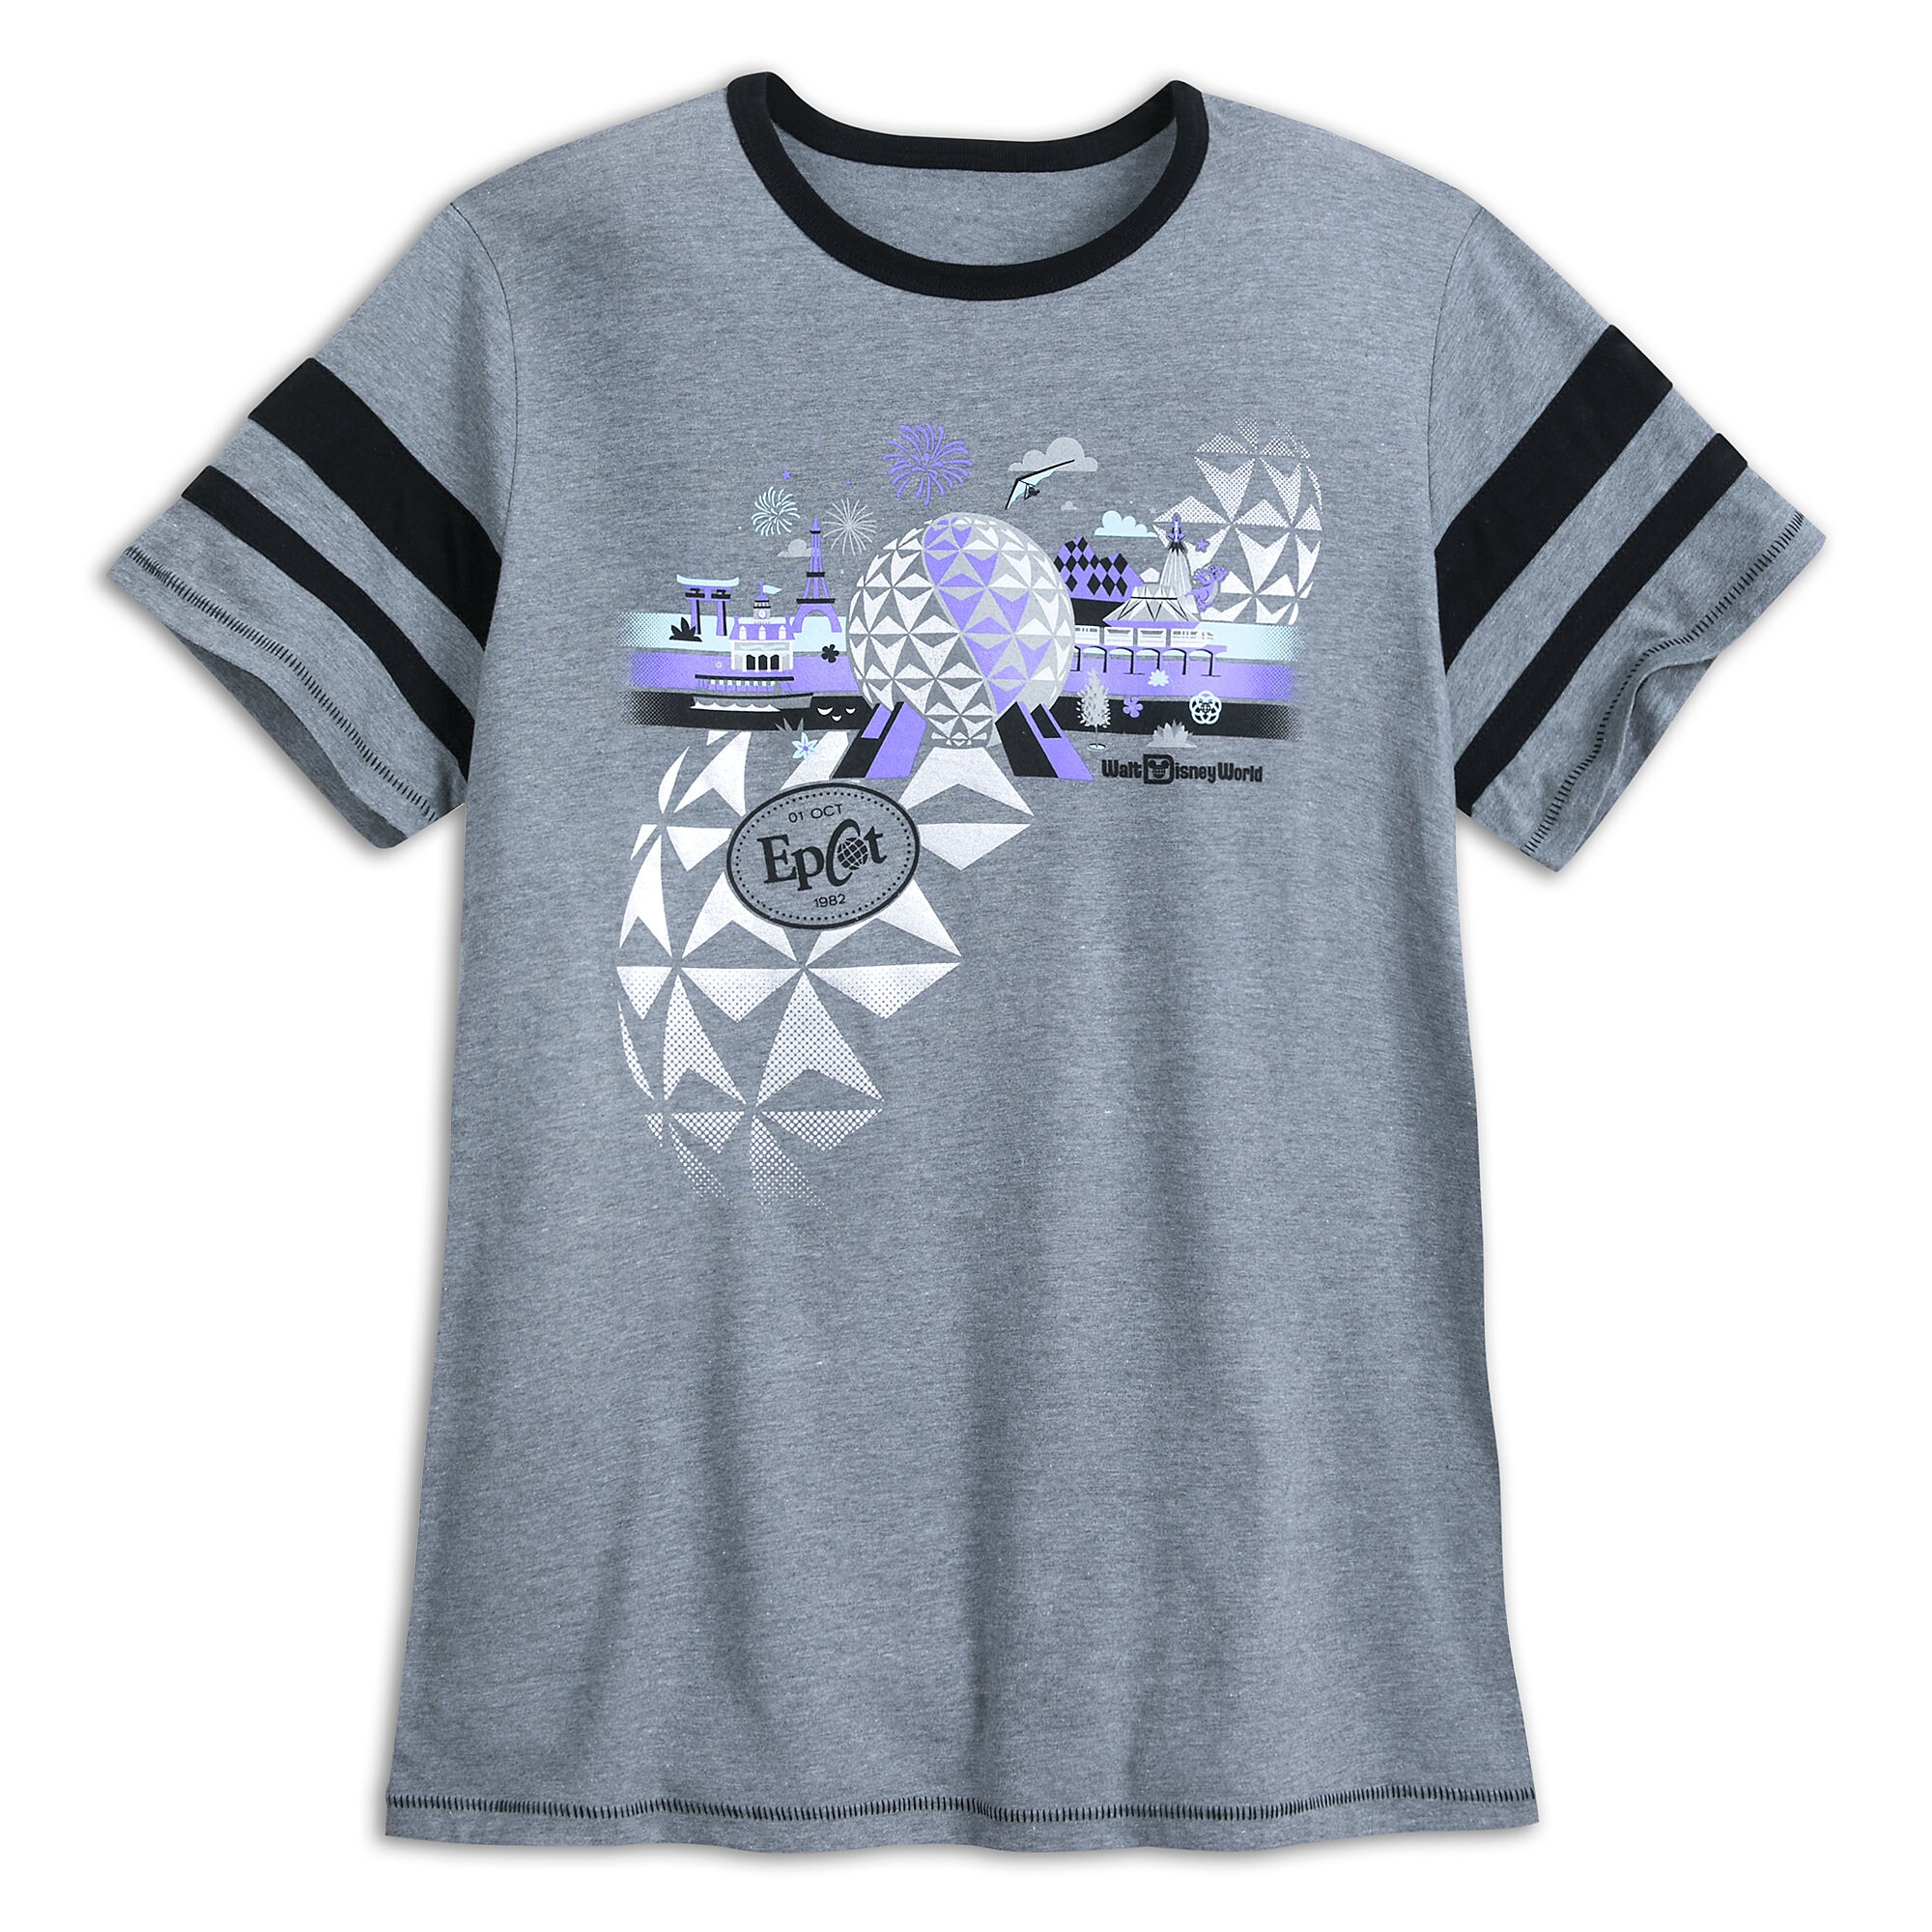 Epcot Athletic Jersey T-Shirt for Adults - Walt Disney World